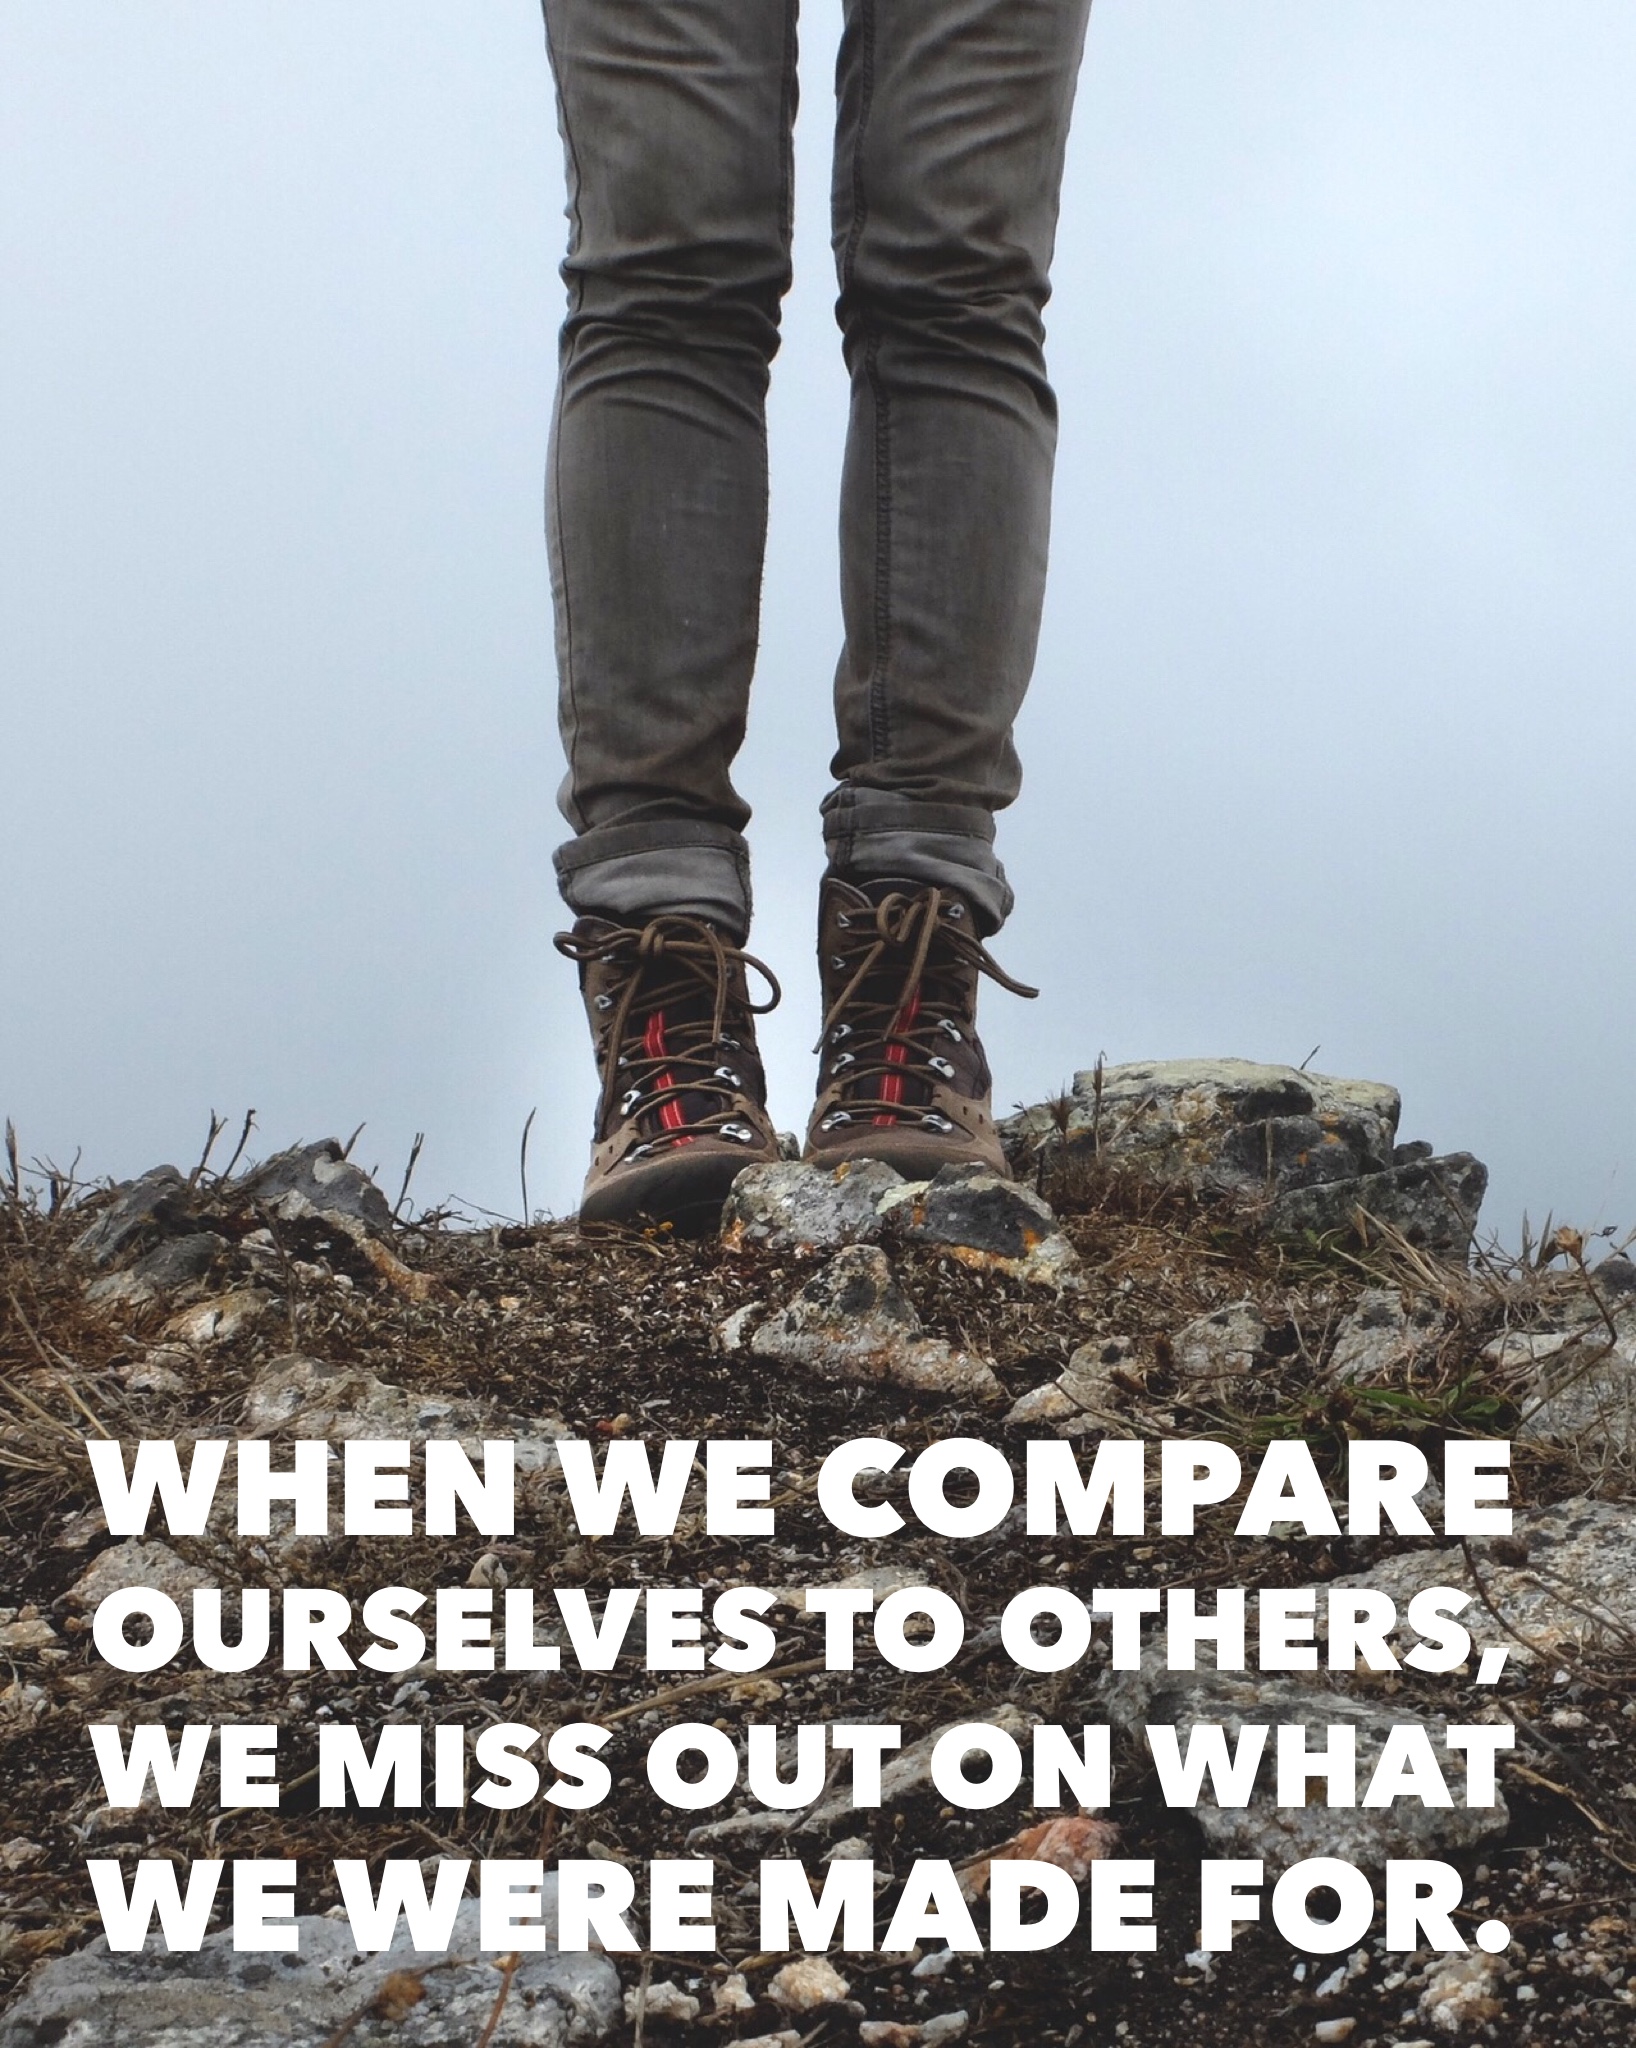 When we compare ourselves to others, we miss out on what we were made for. | InspiredRD.com